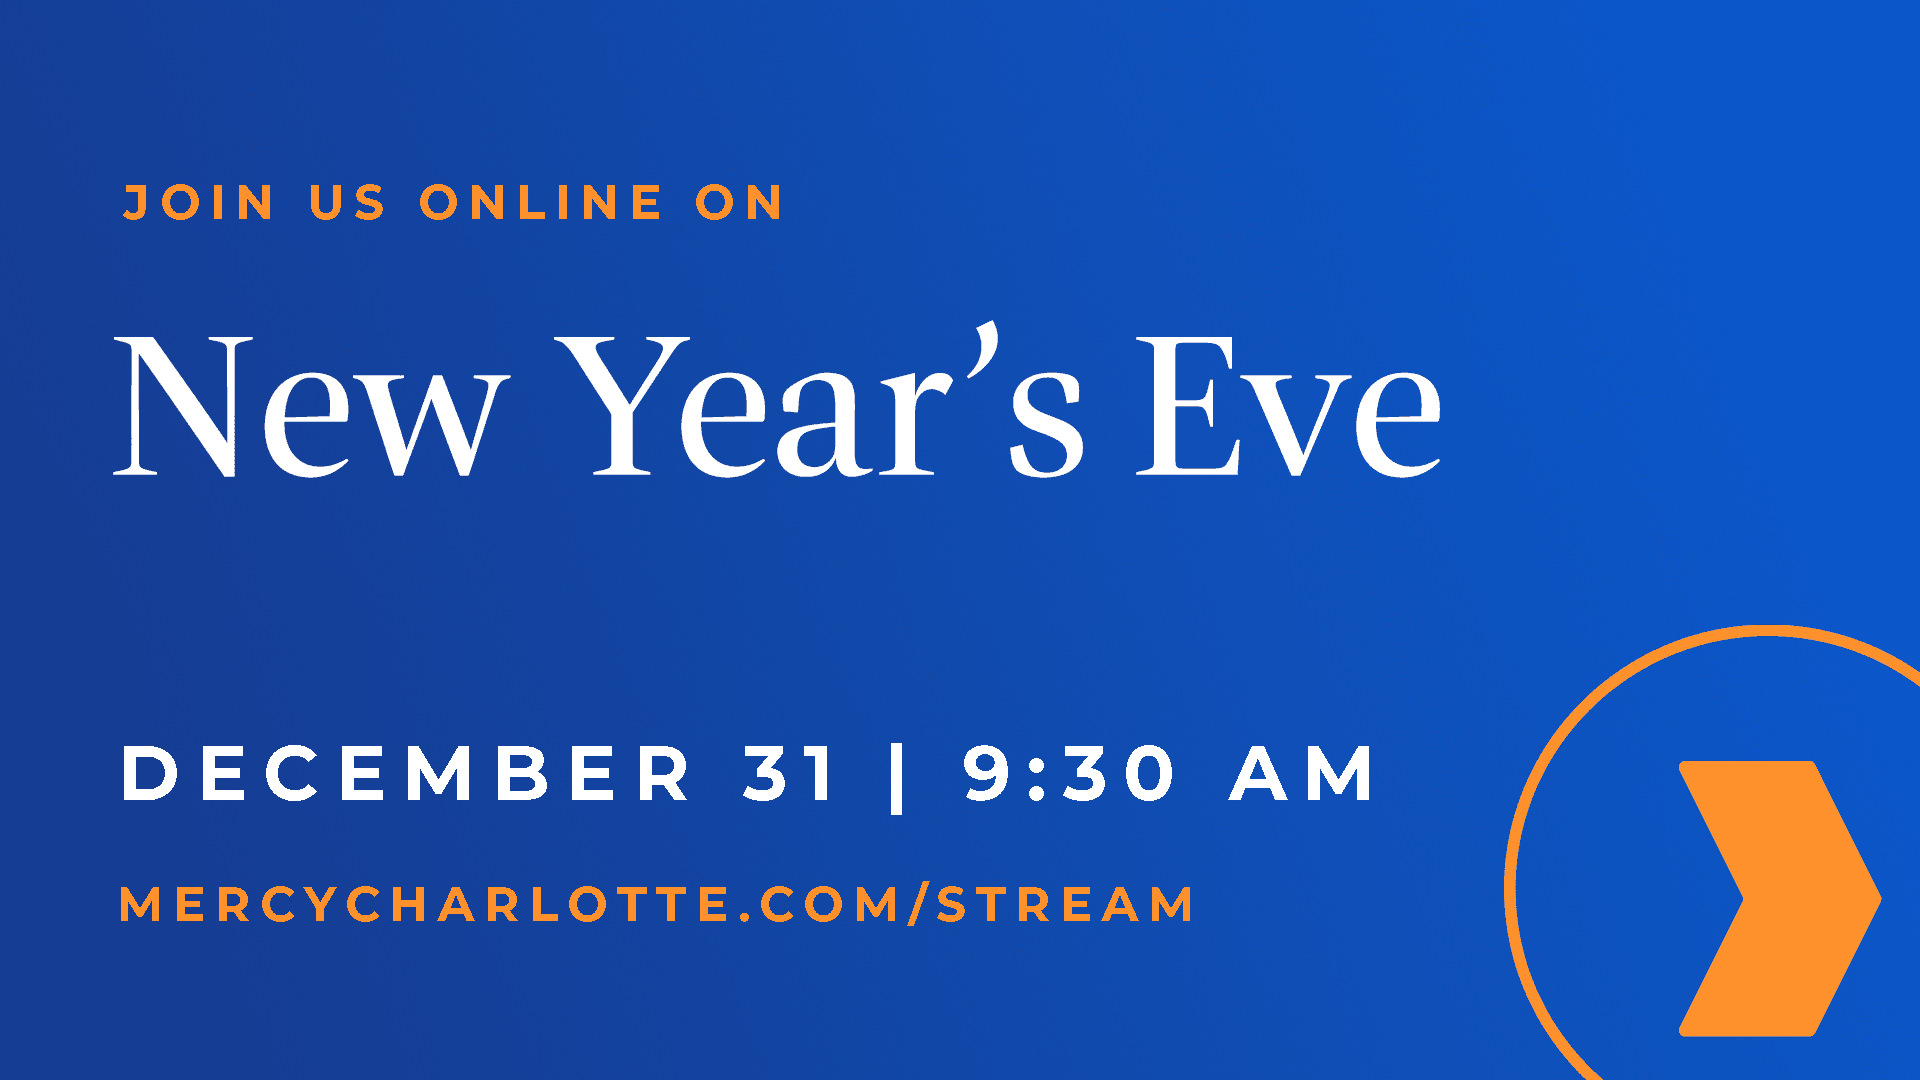 New Years Eve Online Service Only - New Years Eve Service - Online Only!